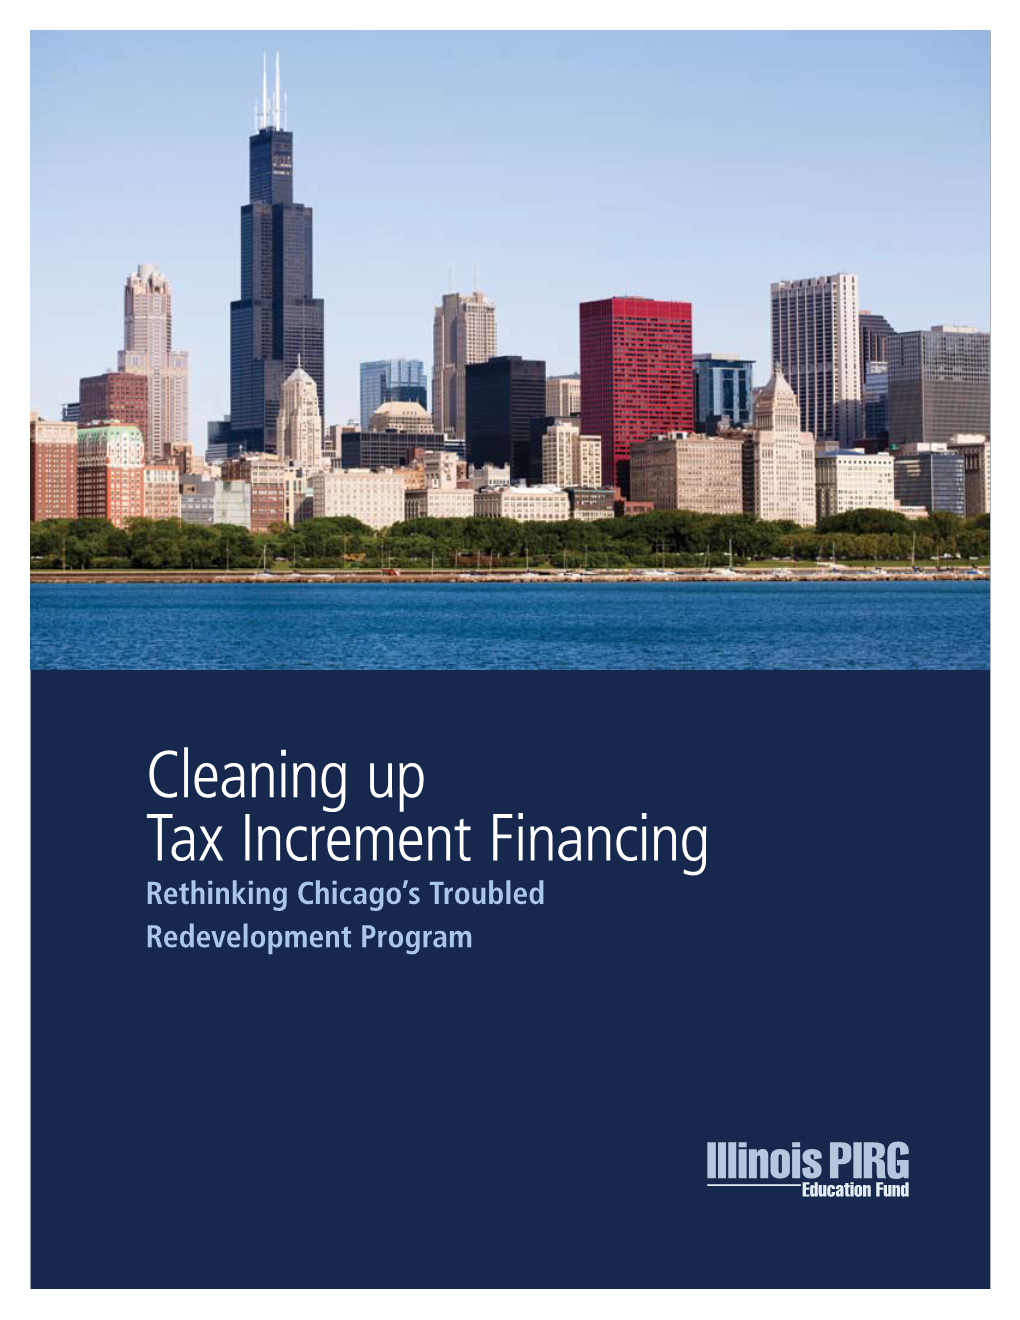 Cleaning up Tax Increment Financing